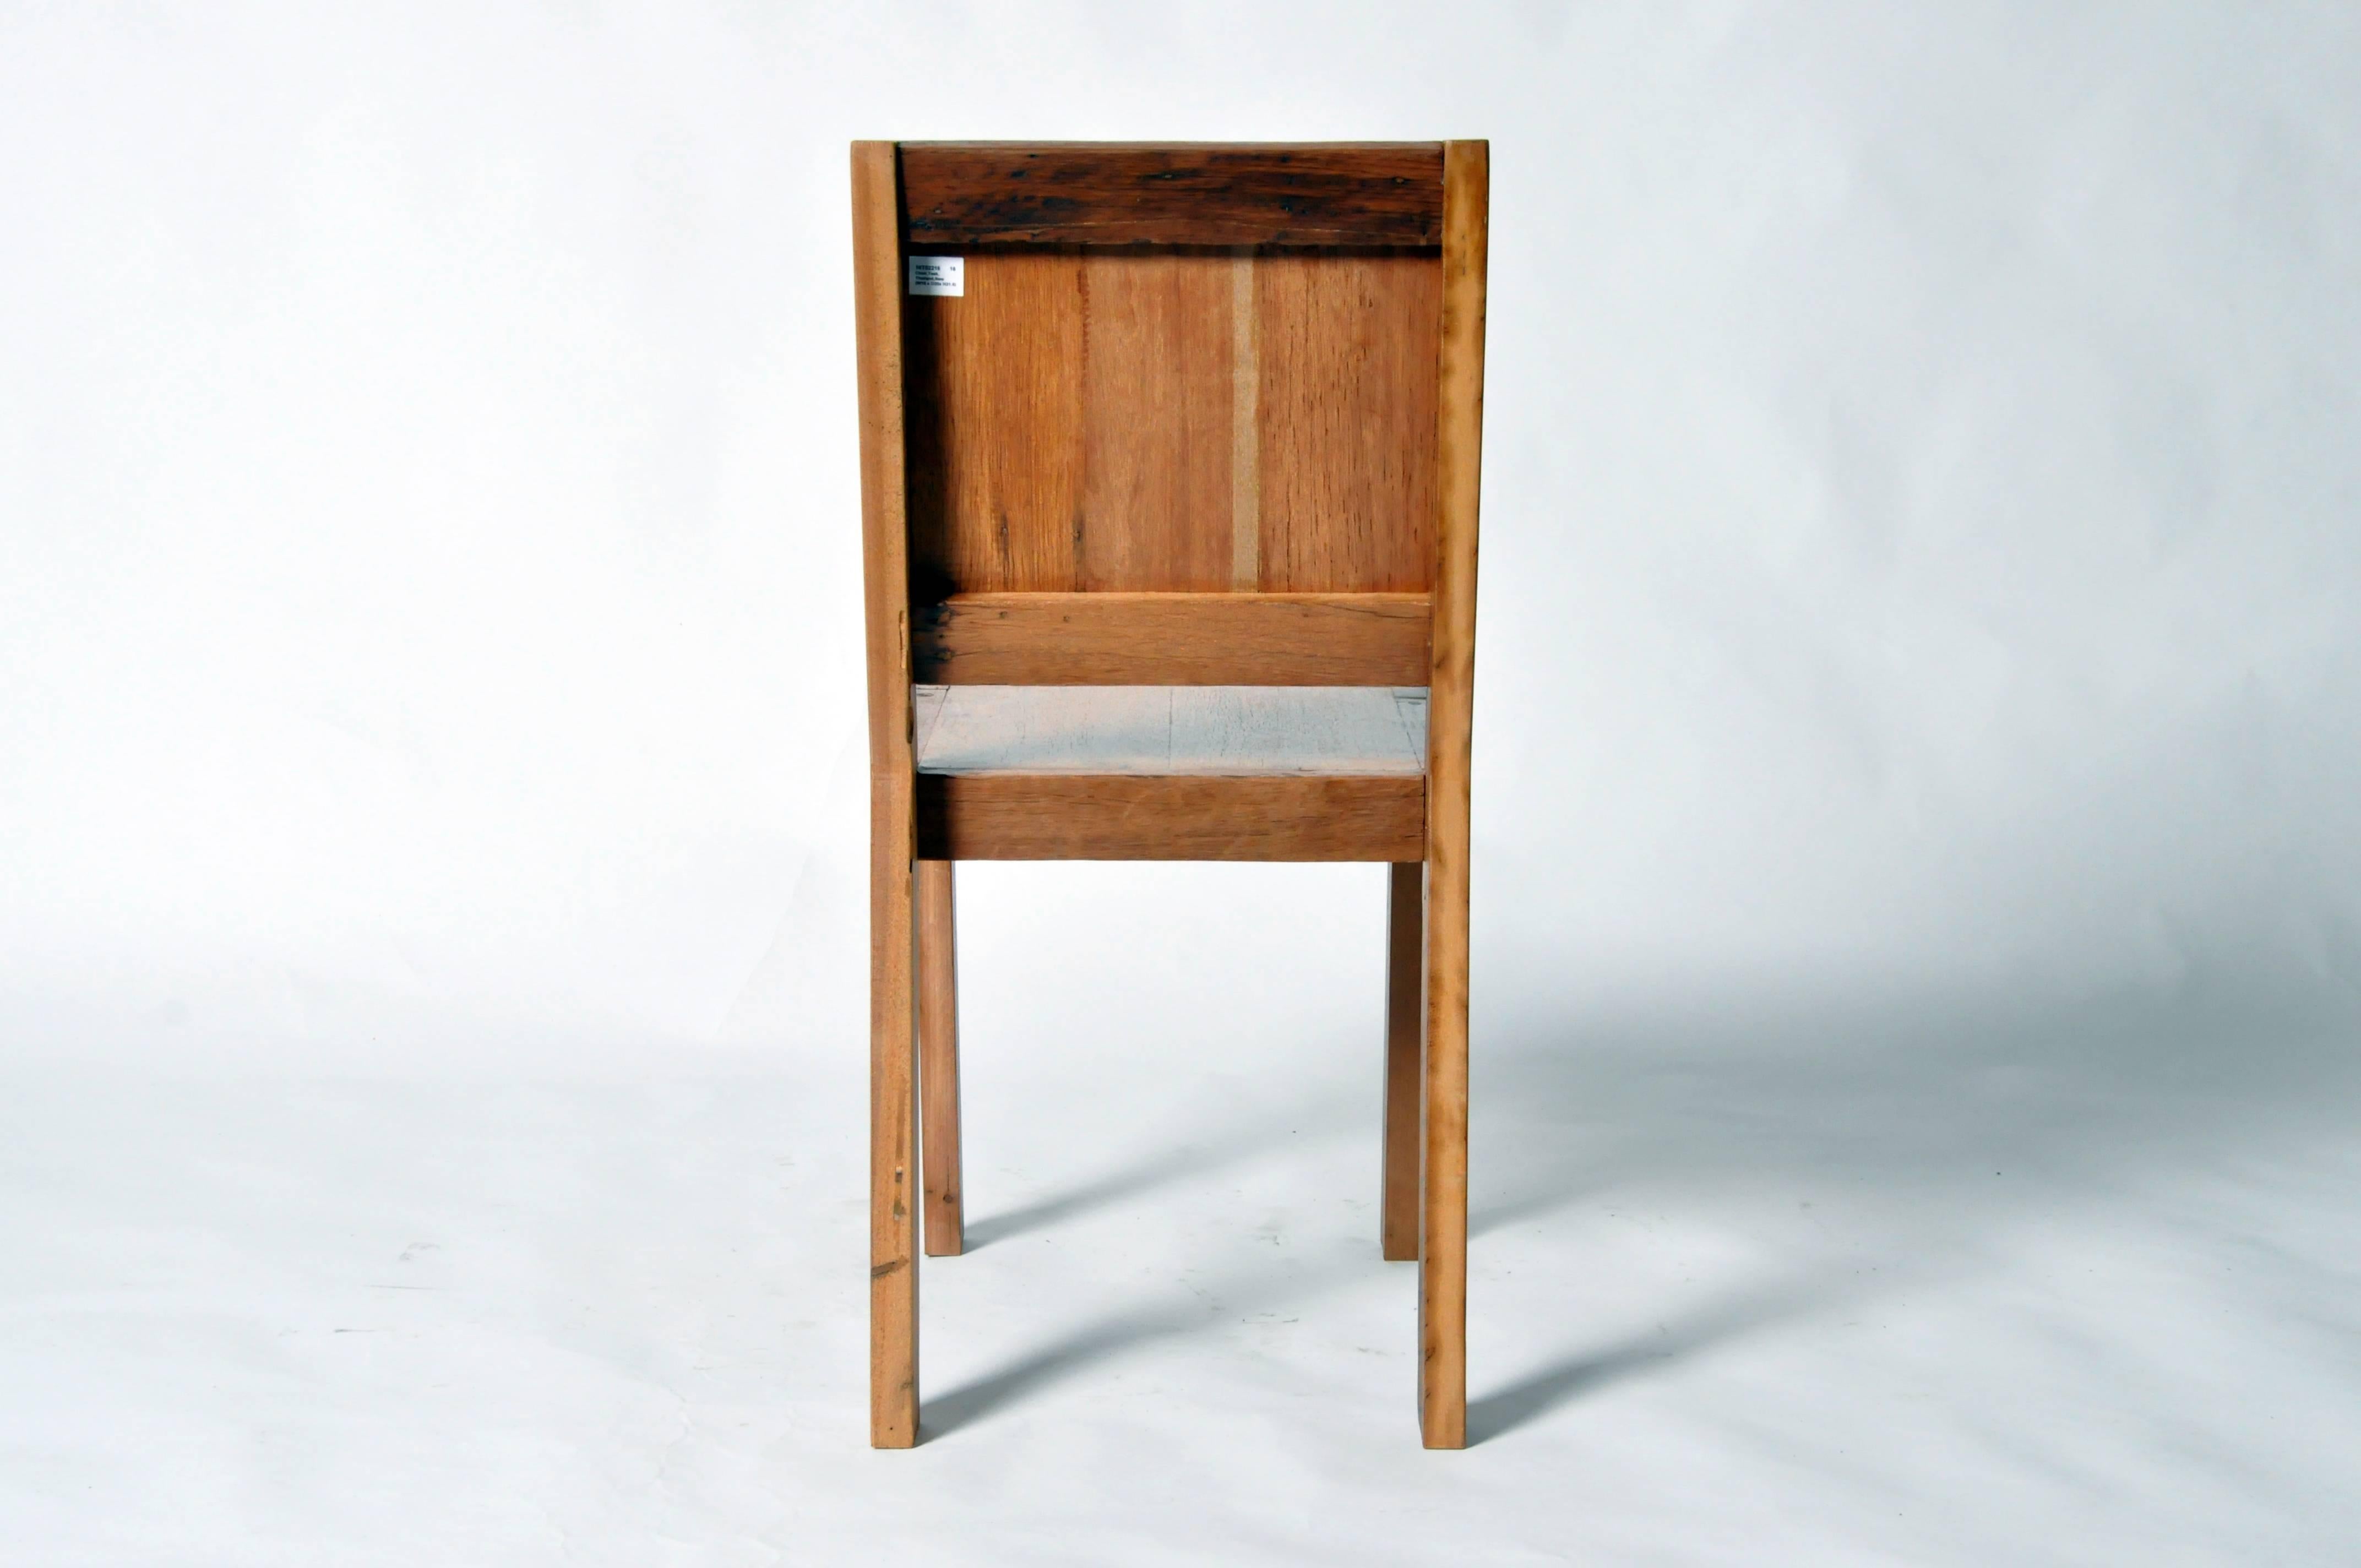 Contemporary Reclaimed Teak Wood Chairs